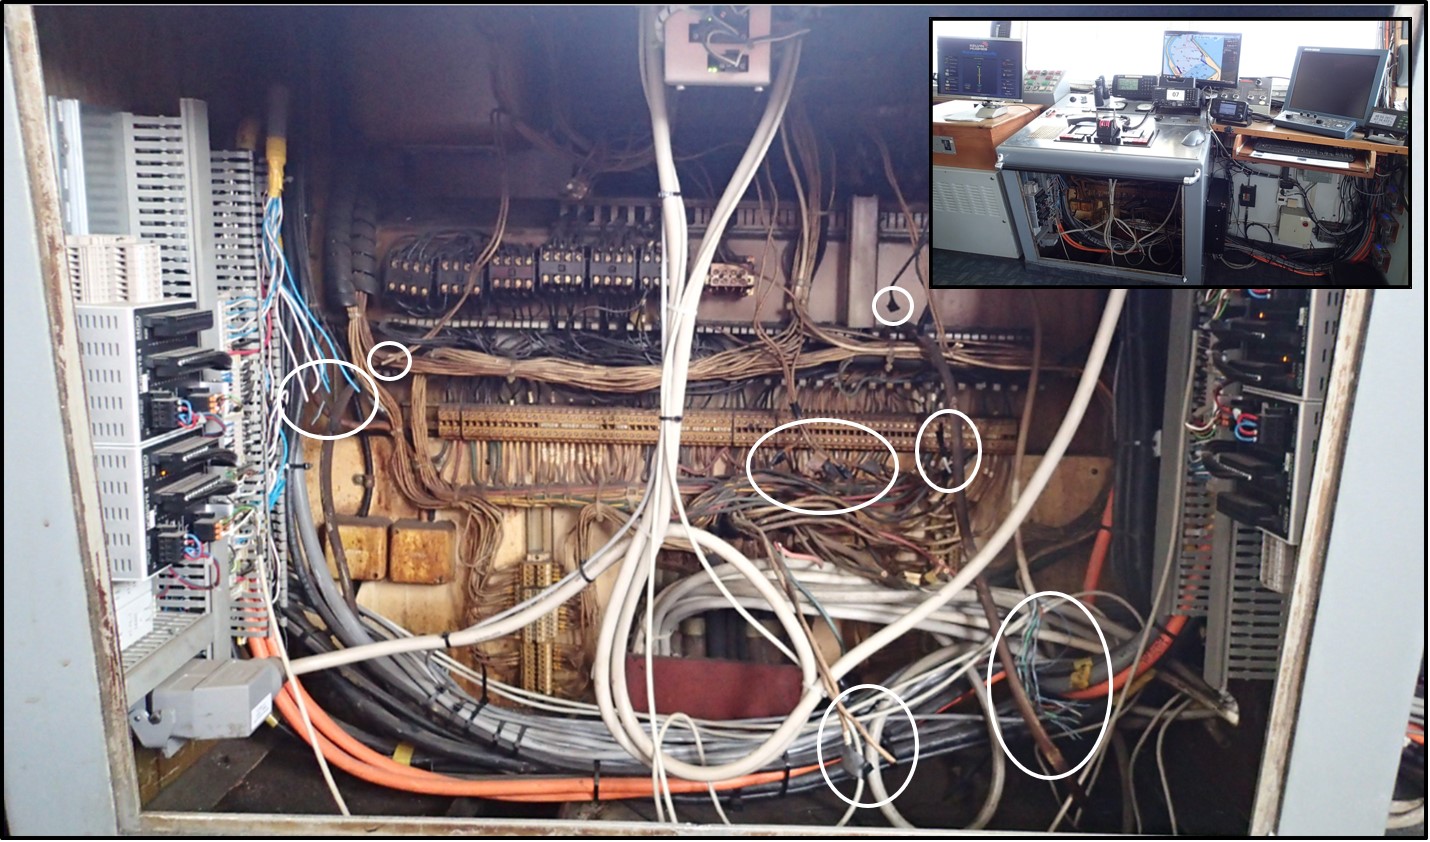 Redundant electrical wires in bridge console (Source: TSB)